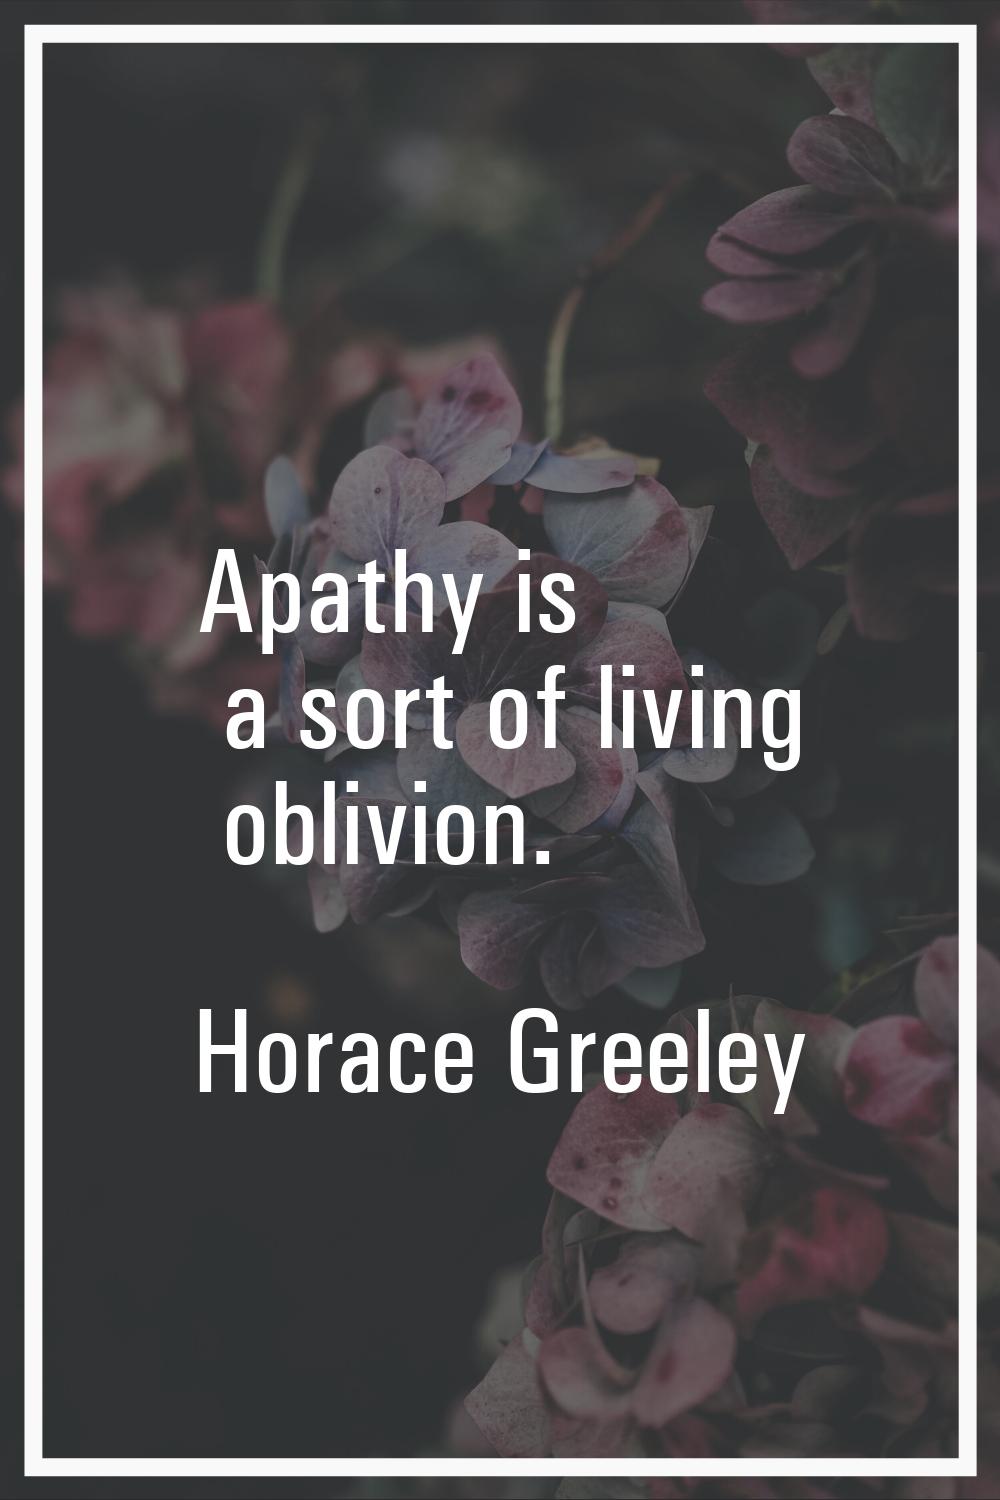 Apathy is a sort of living oblivion.